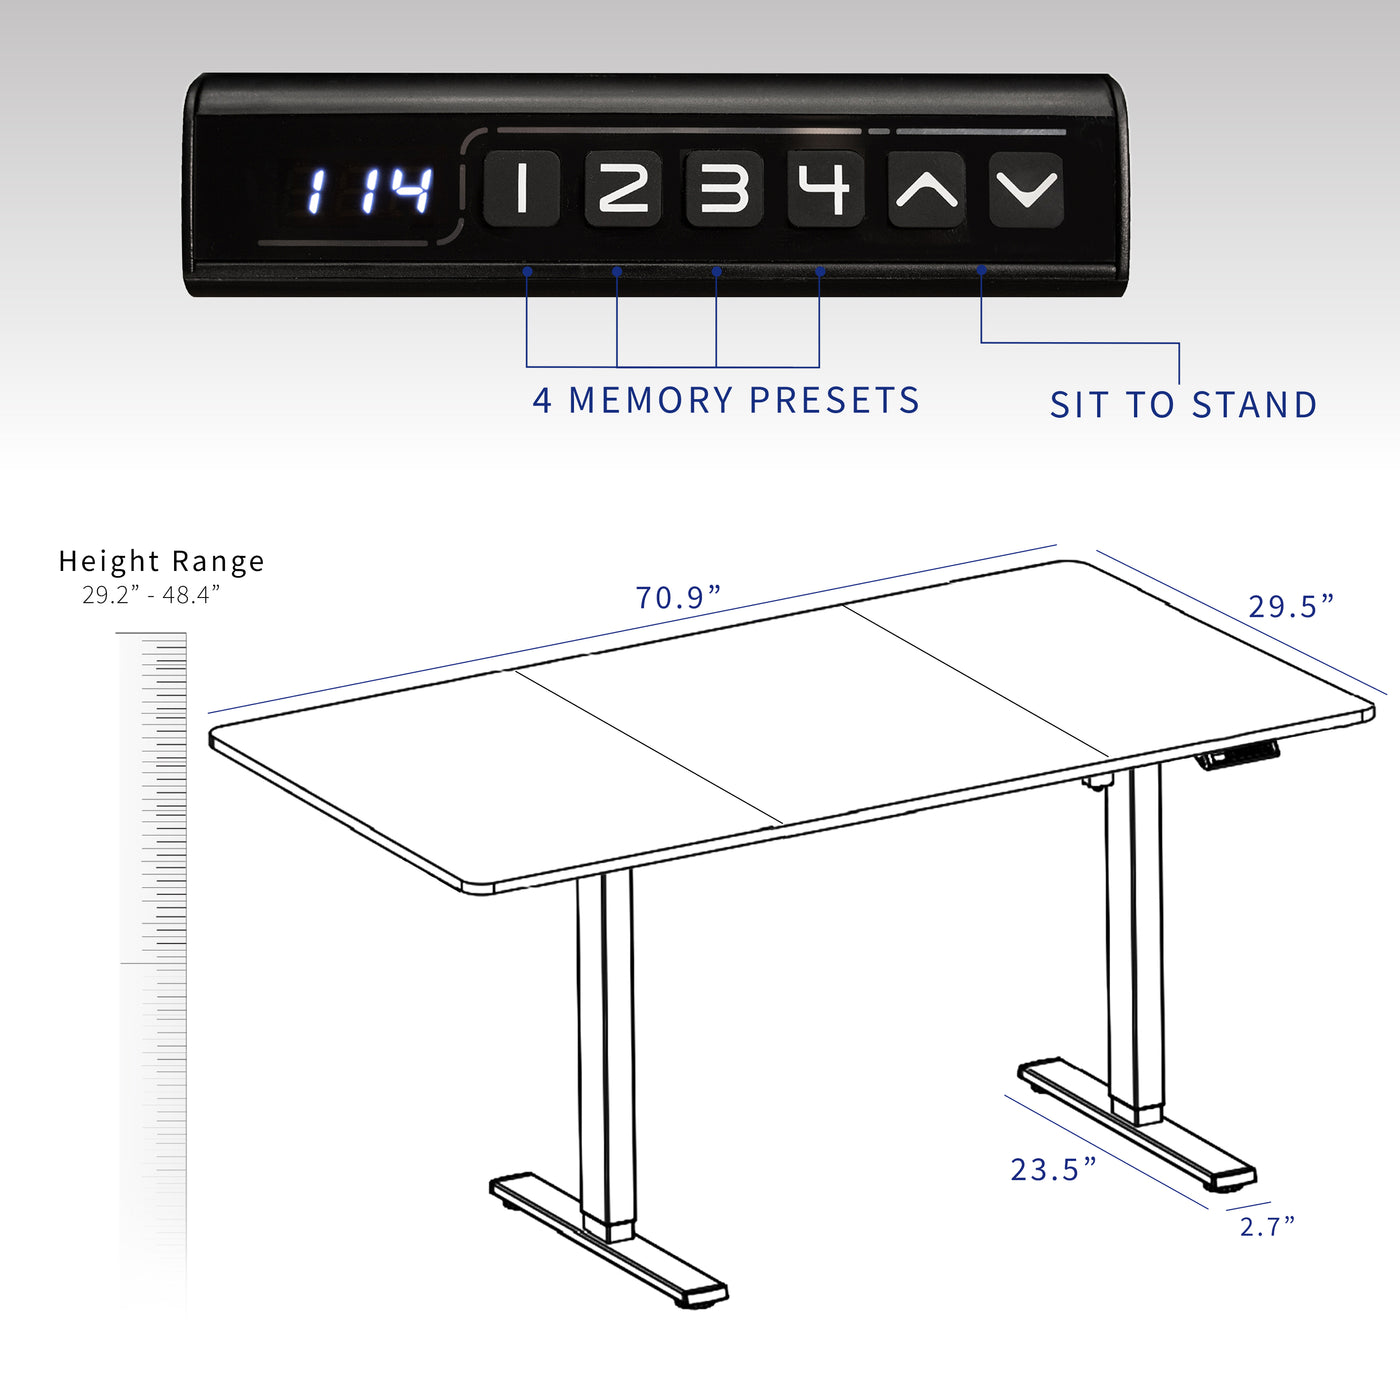 Dimensions of height, width, and depth of the electric desk that ships in two boxes.